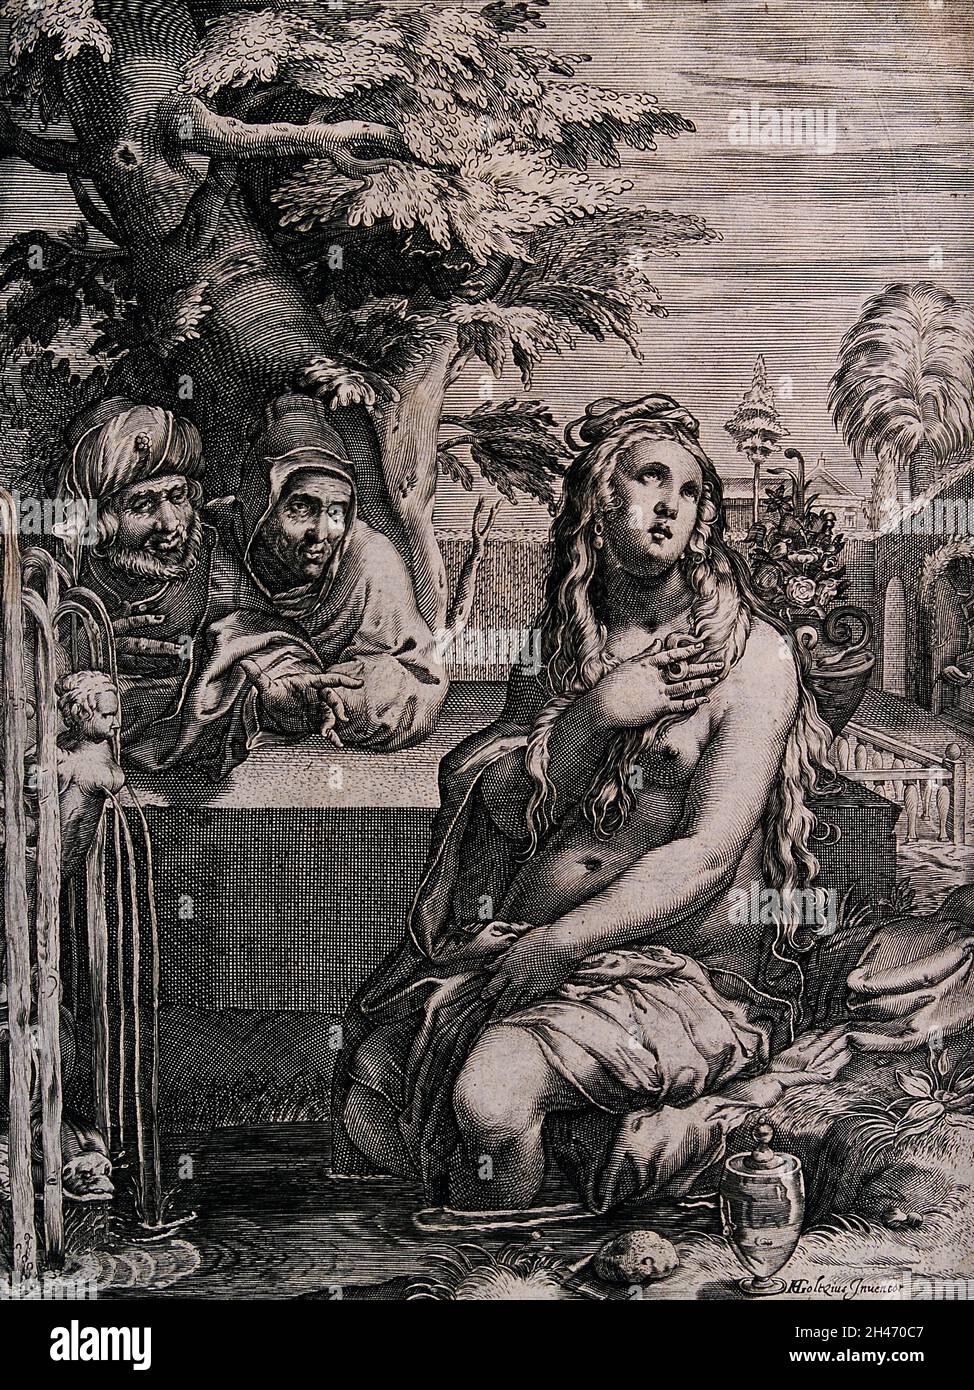 Susanna bathing at the edge of a pool while two men are watching her ...